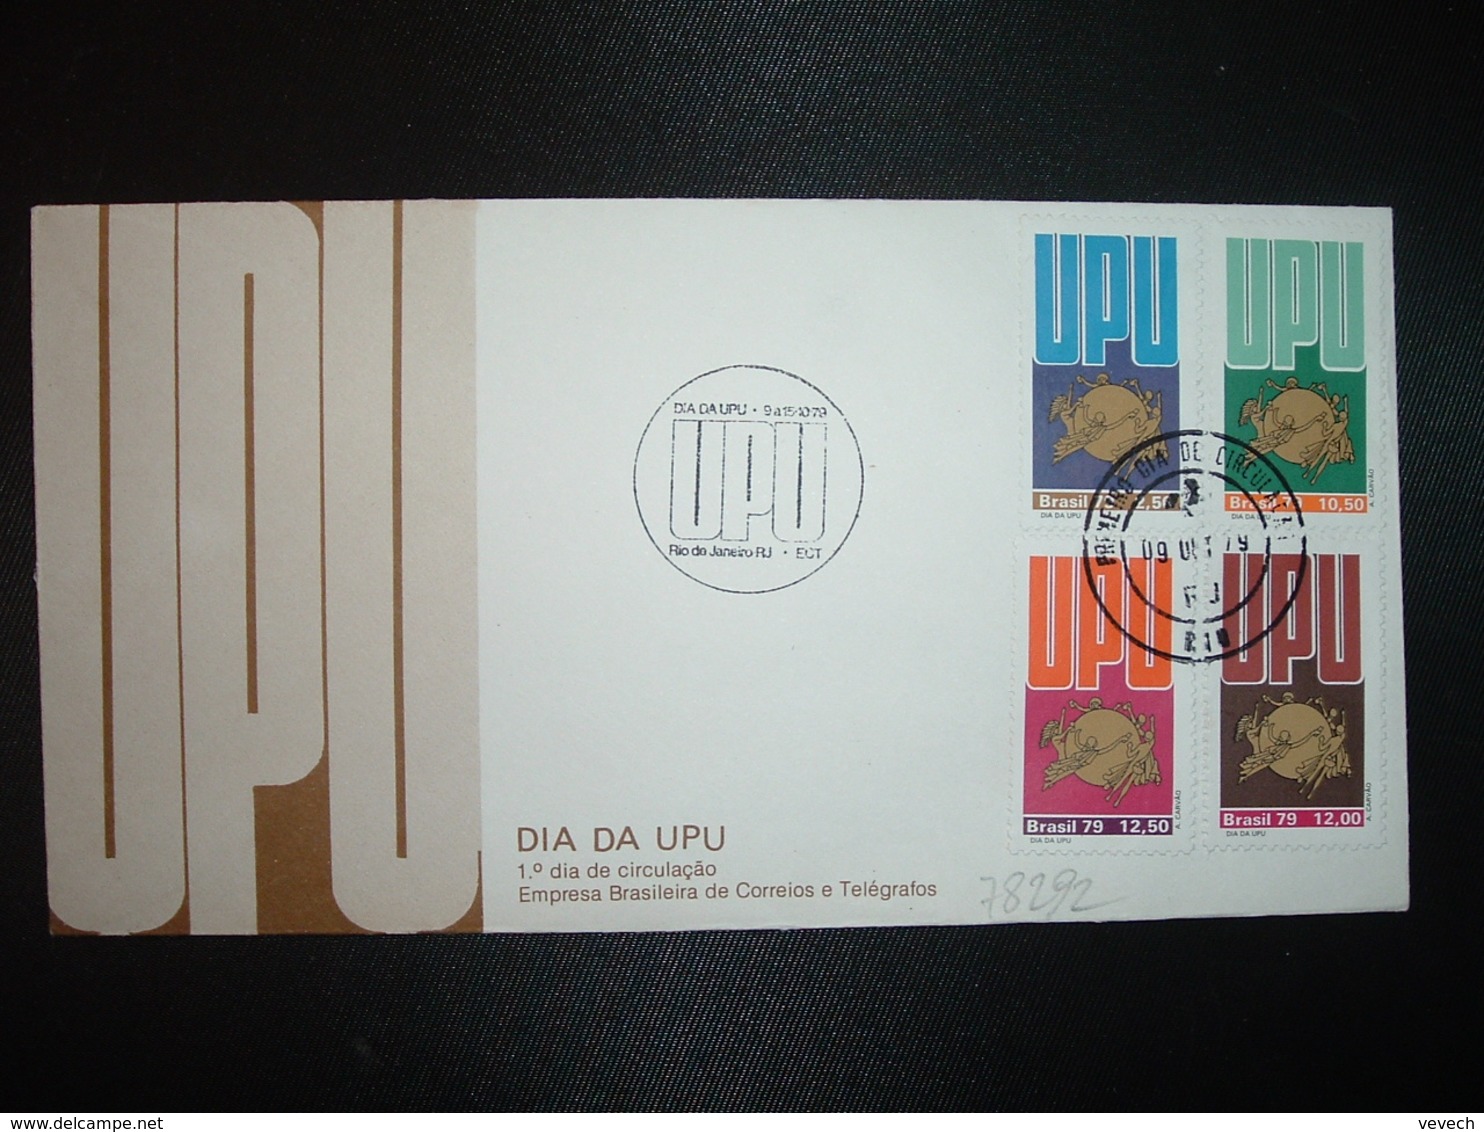 LETTRE TP UPU 2,50 + 10,50 + 12,50 + 12,00 OBL.09 OCT 79 RIO - Lettres & Documents